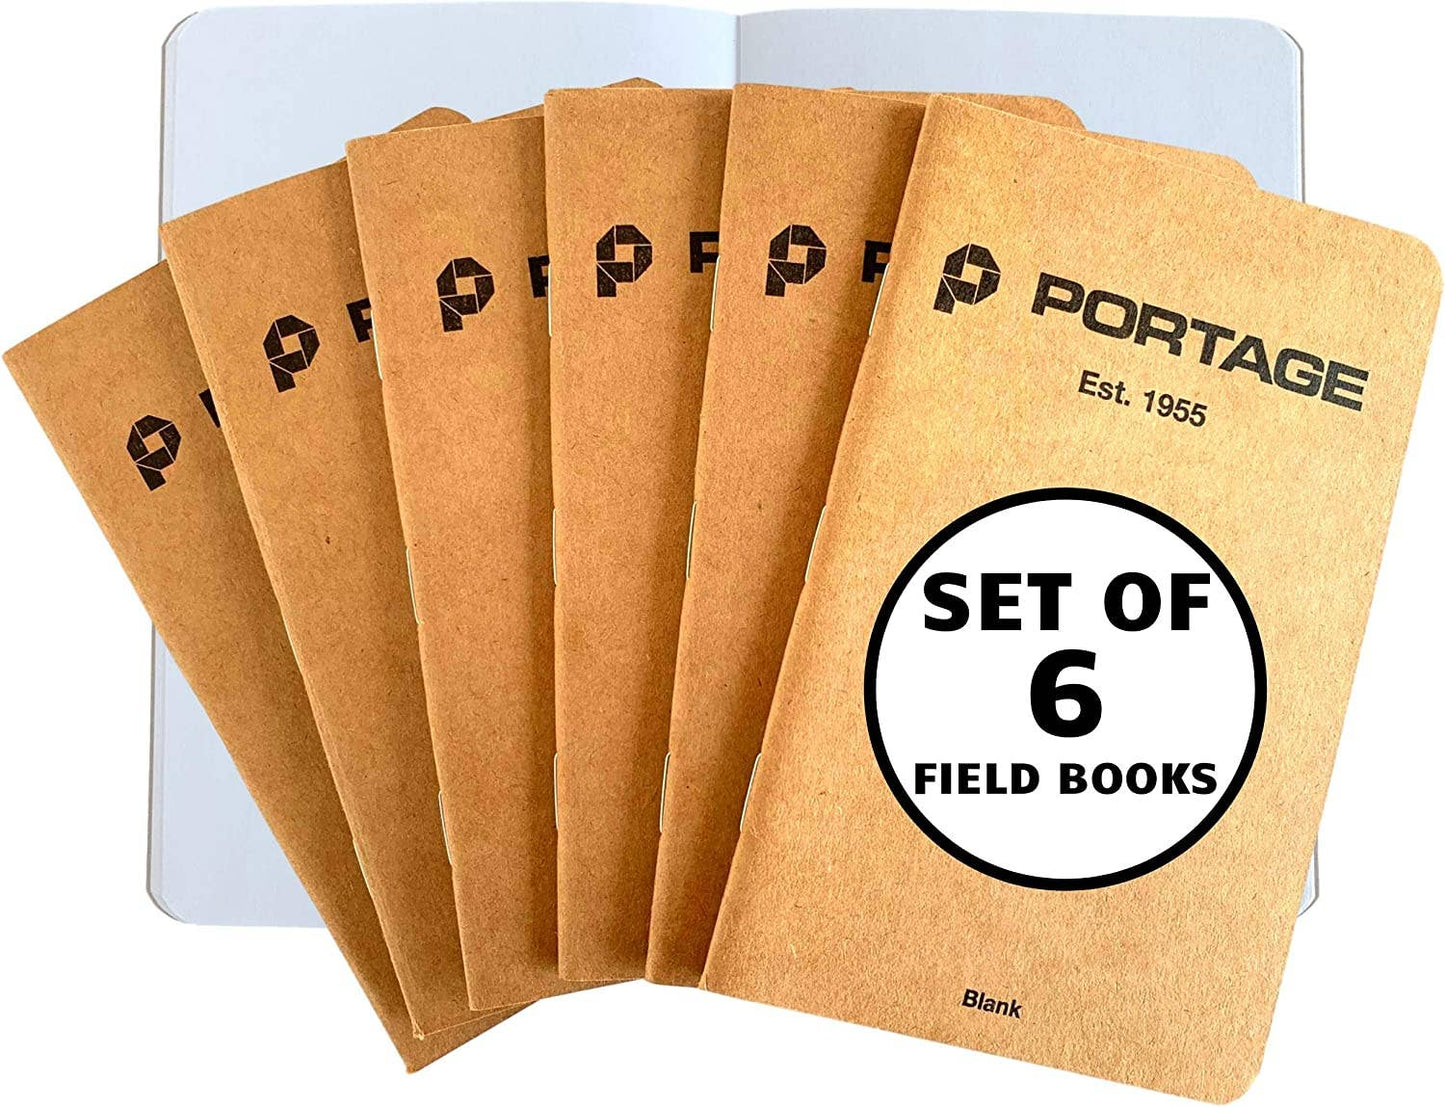 Portage Notebooks - Notepad for Field Notes | 3.5" x 5.5" | 64 Pages (6 Pack)